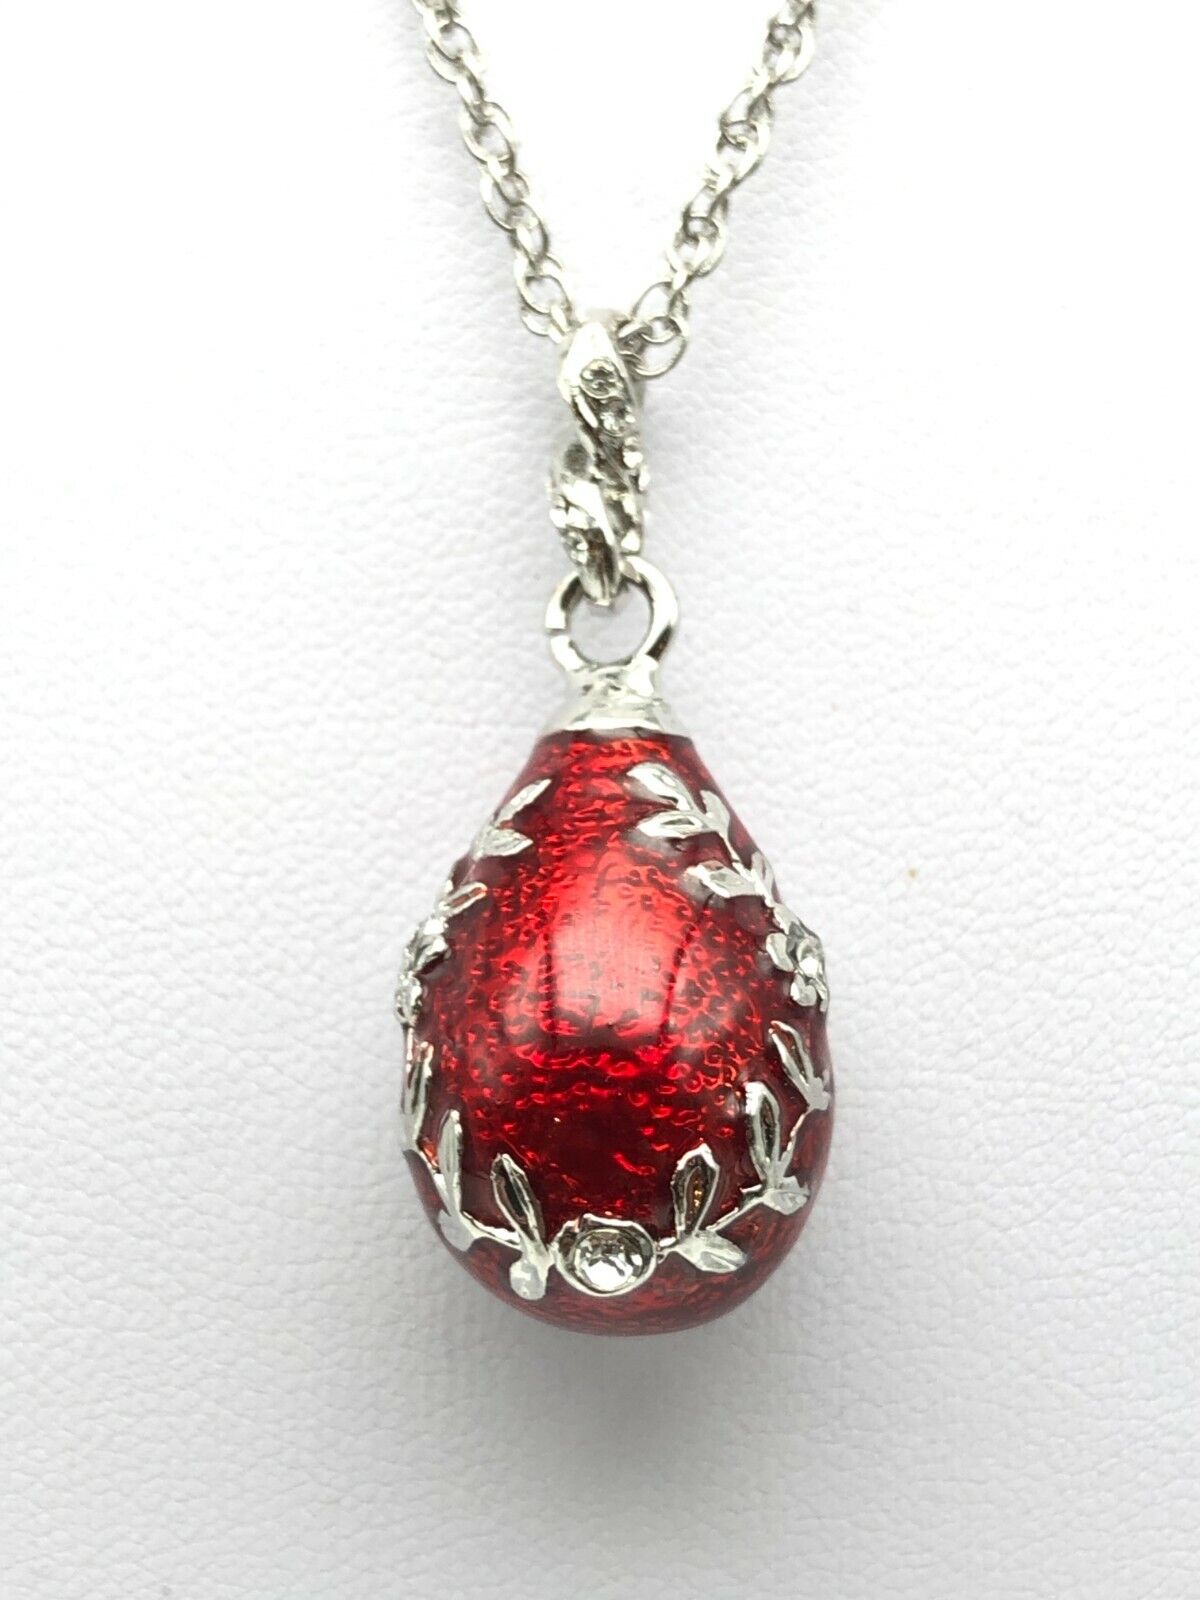 Red Egg Pendant Necklace with crystals by Keren Kopal